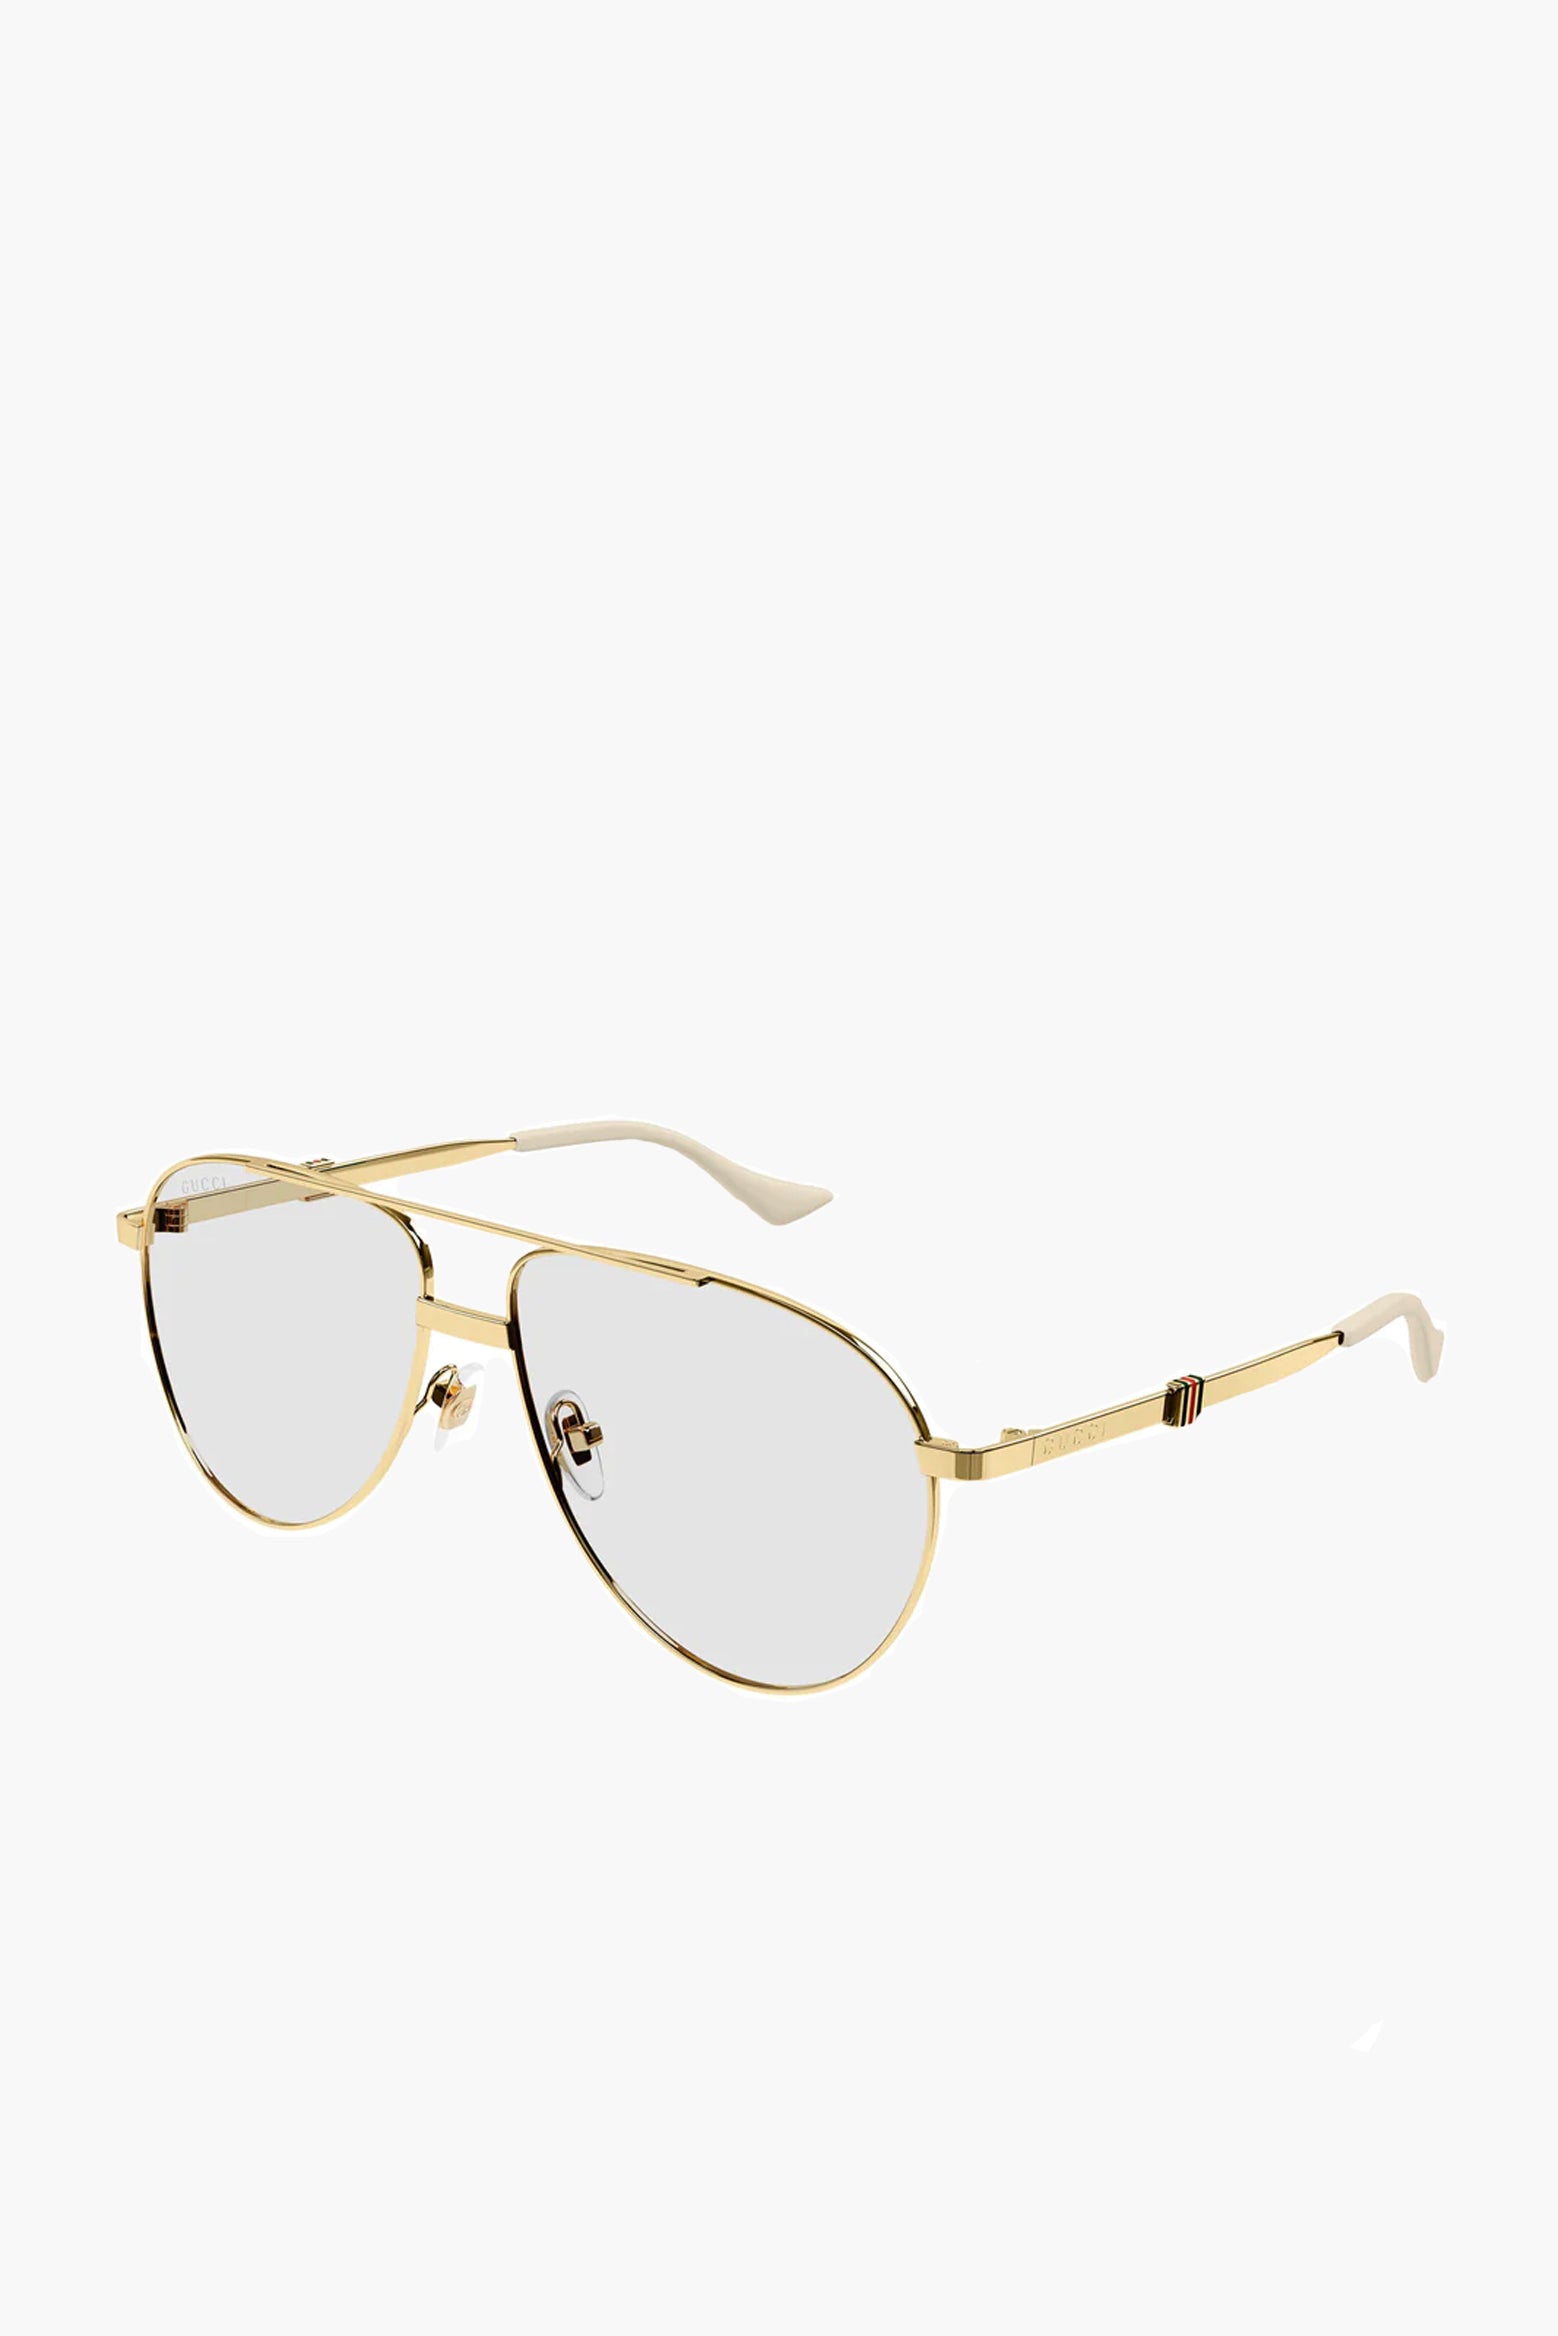 Gucci Gold Aviator Sunglasses in Gold available at The New Trend Australia.